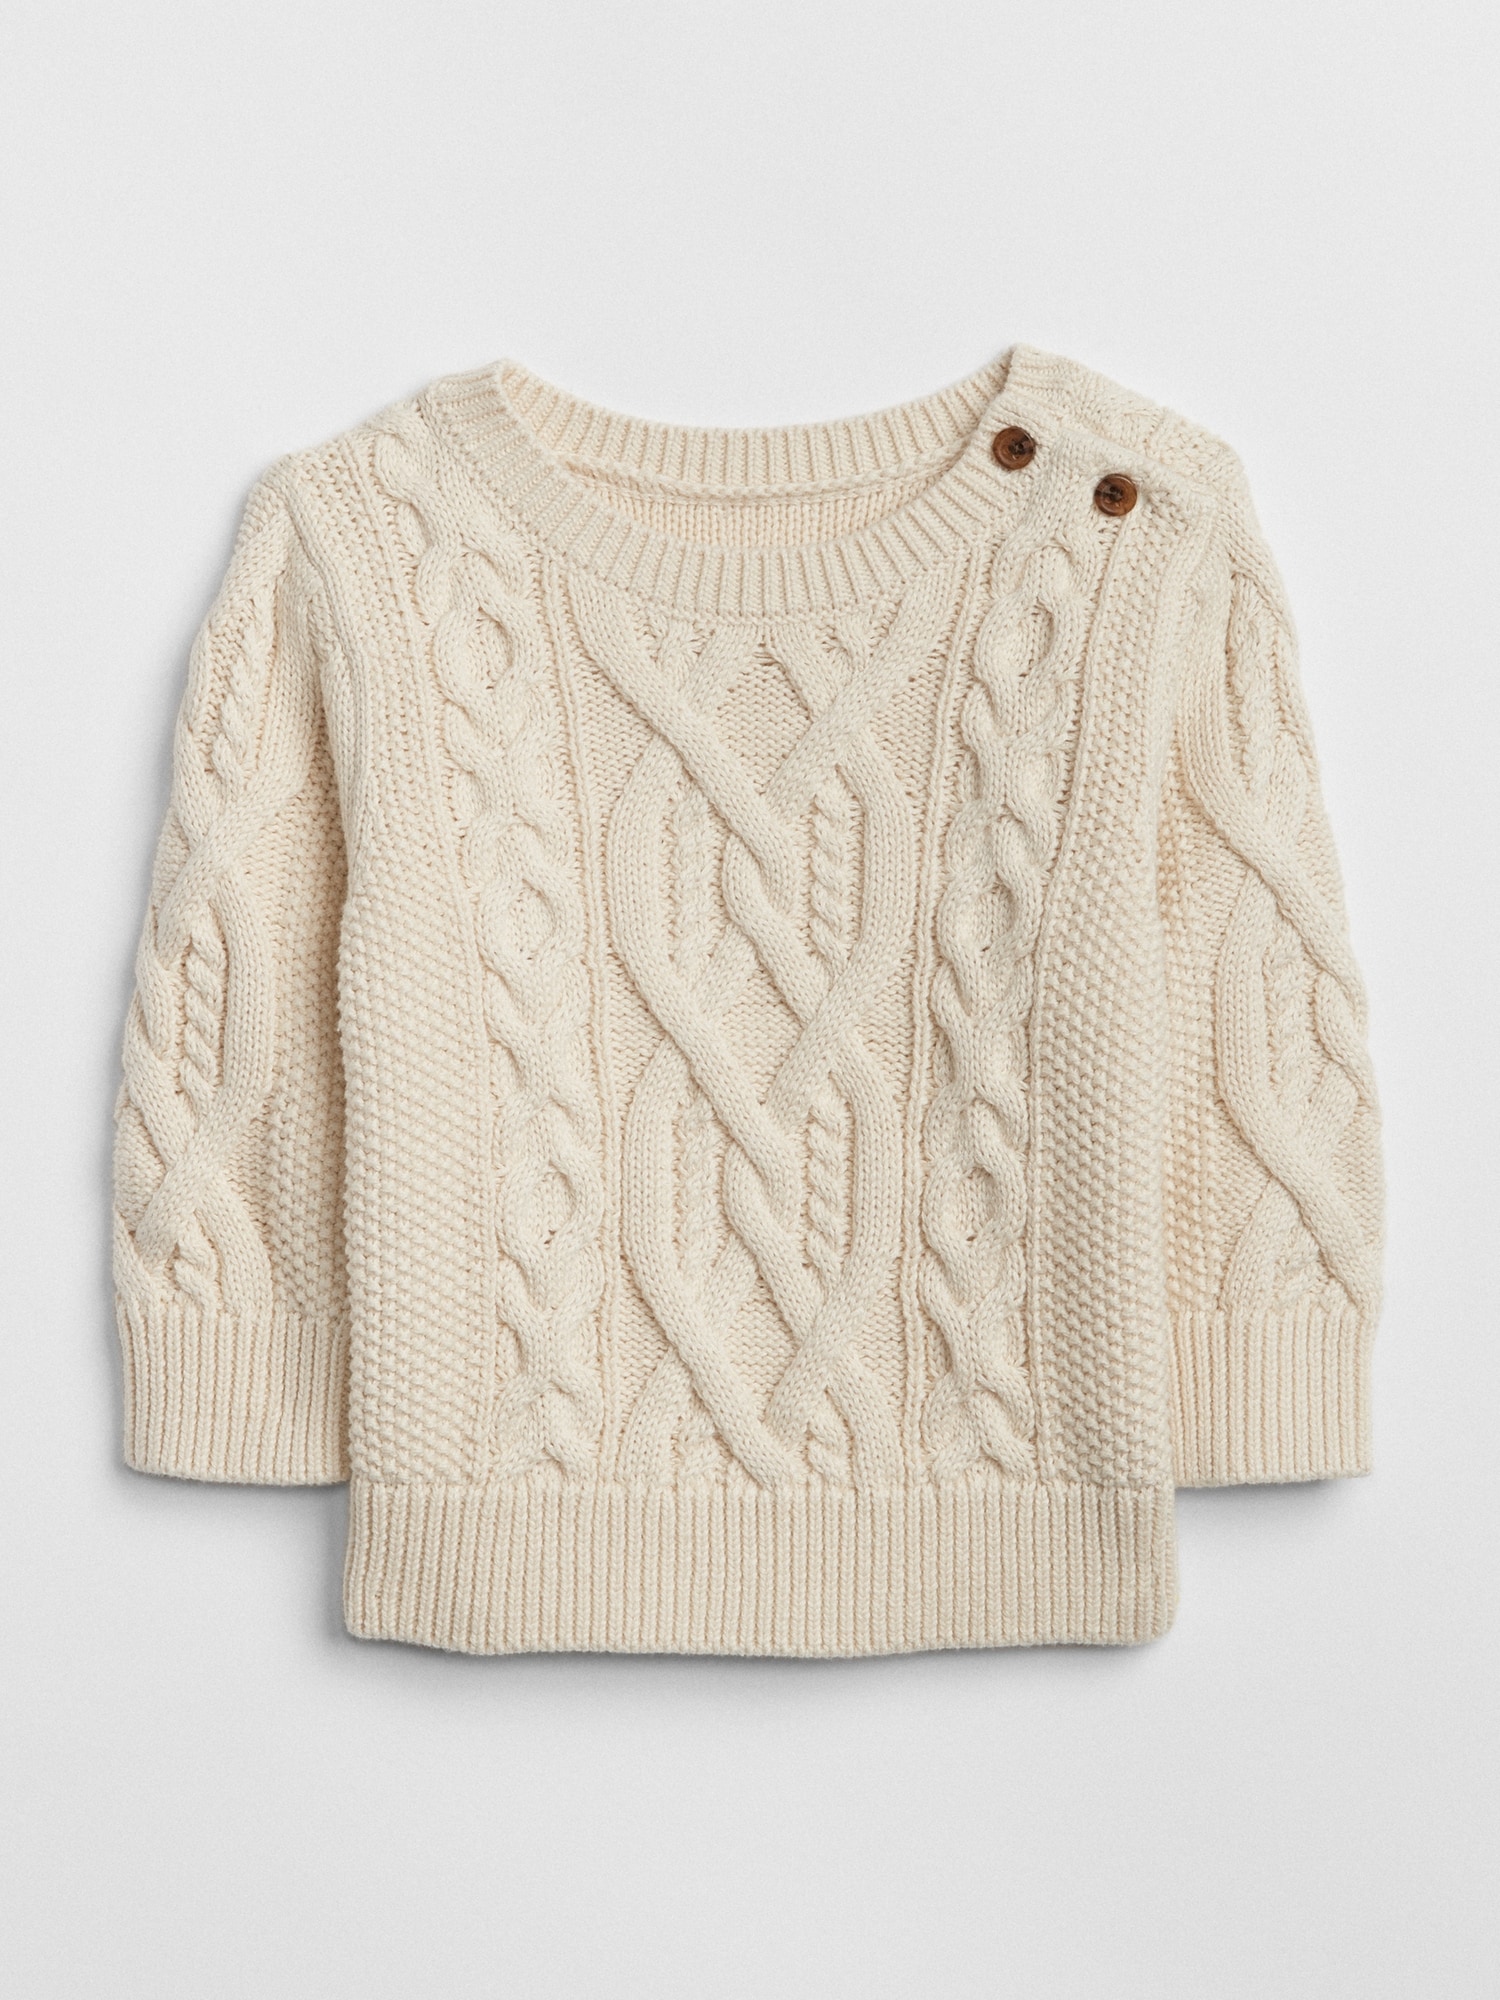 Casual and with style through the winter in a cable knit sweater